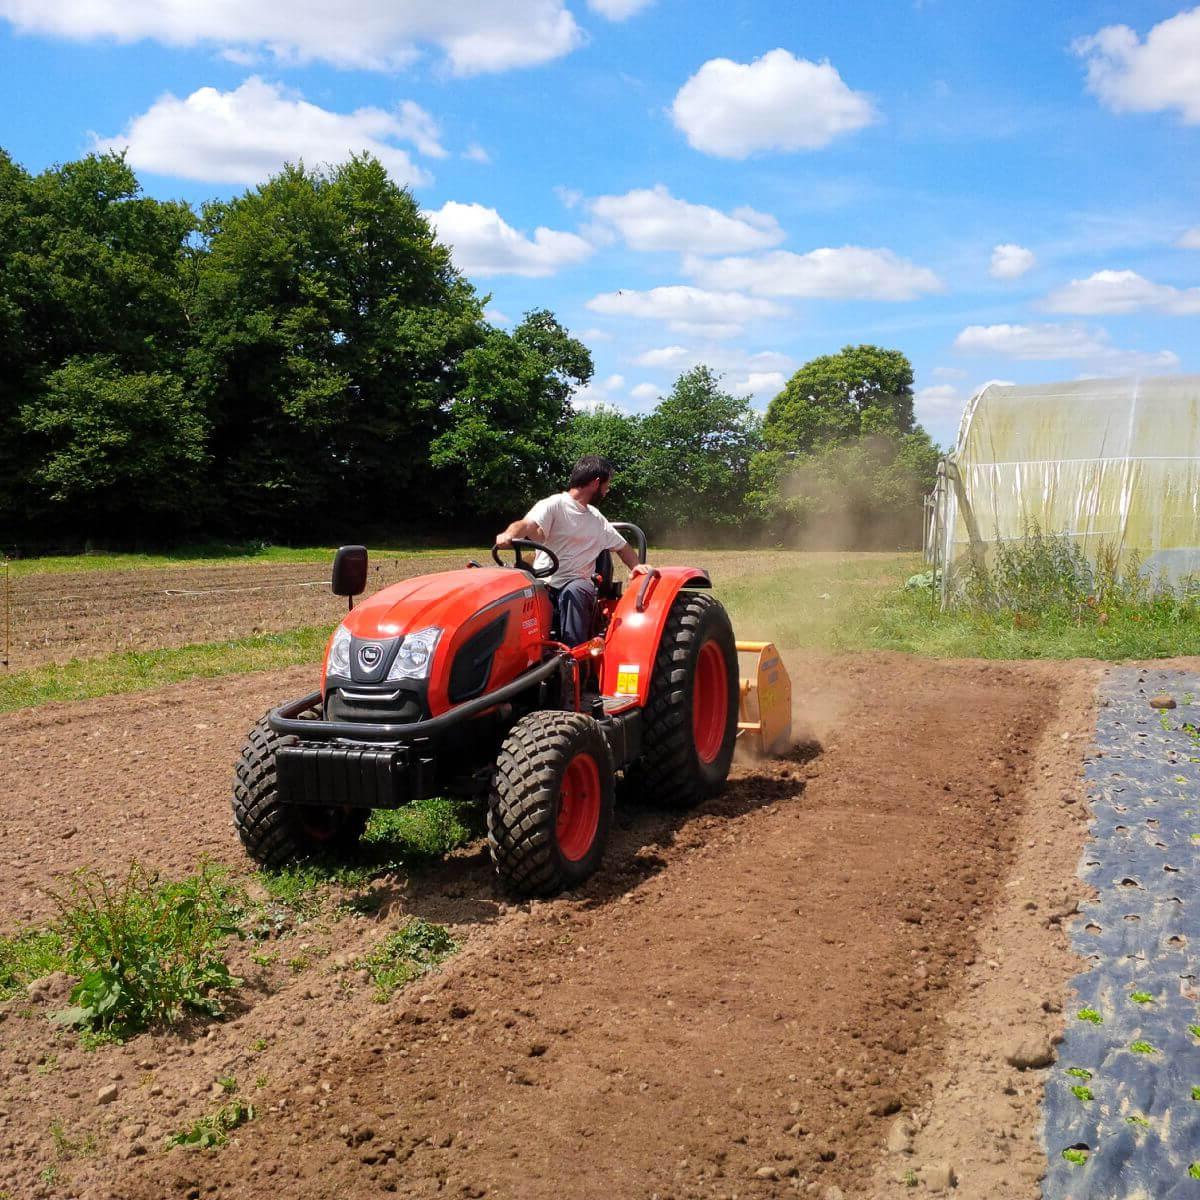 Compact tractor for commercial farming from Kioti